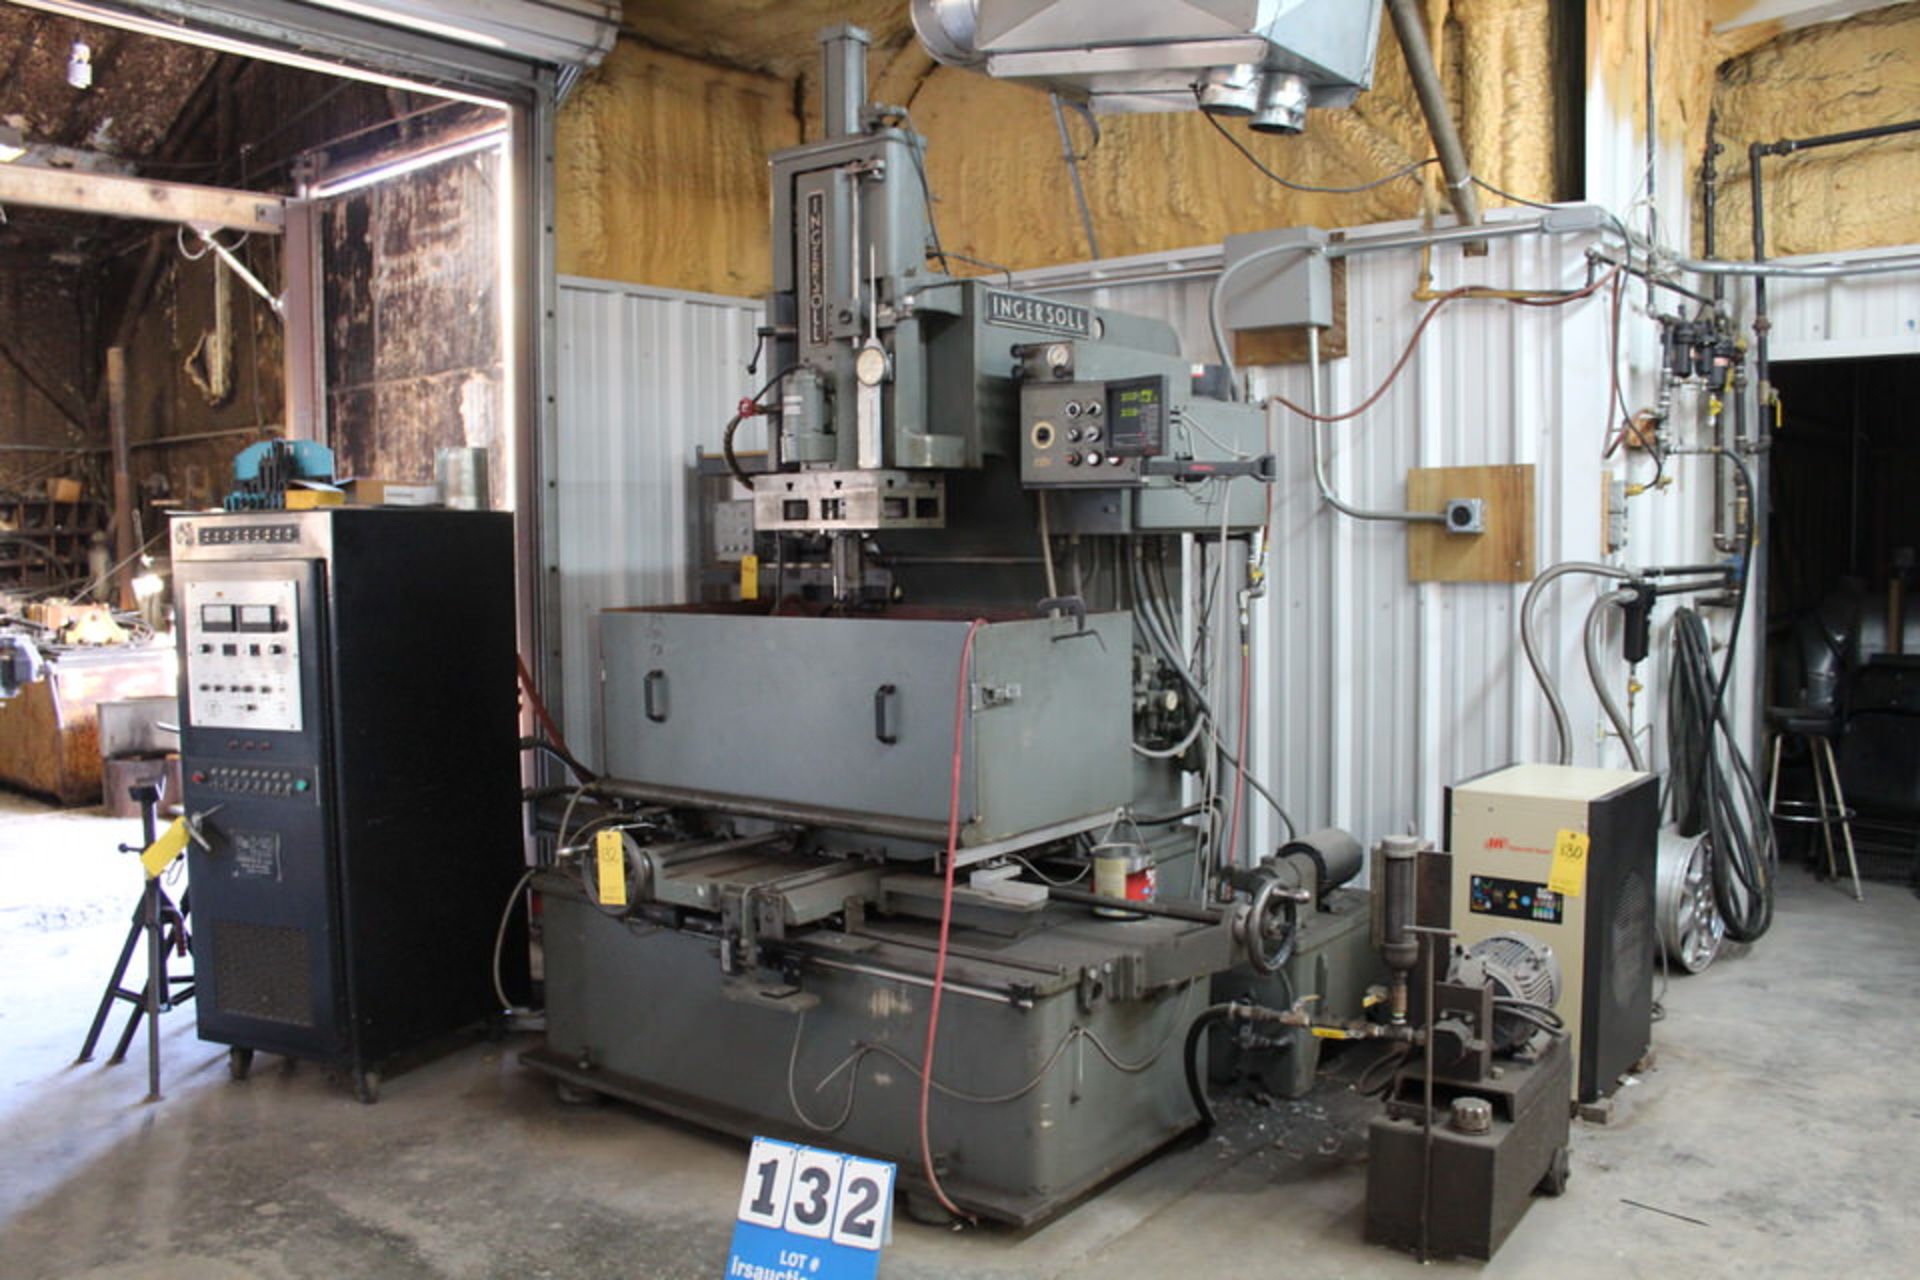 INGERSOLL 300 BRS EDM, W/ NEWALL BD700 CONTROLLER, MARC D 140 ELECTRODE CONTROLLER W/ TOOLING